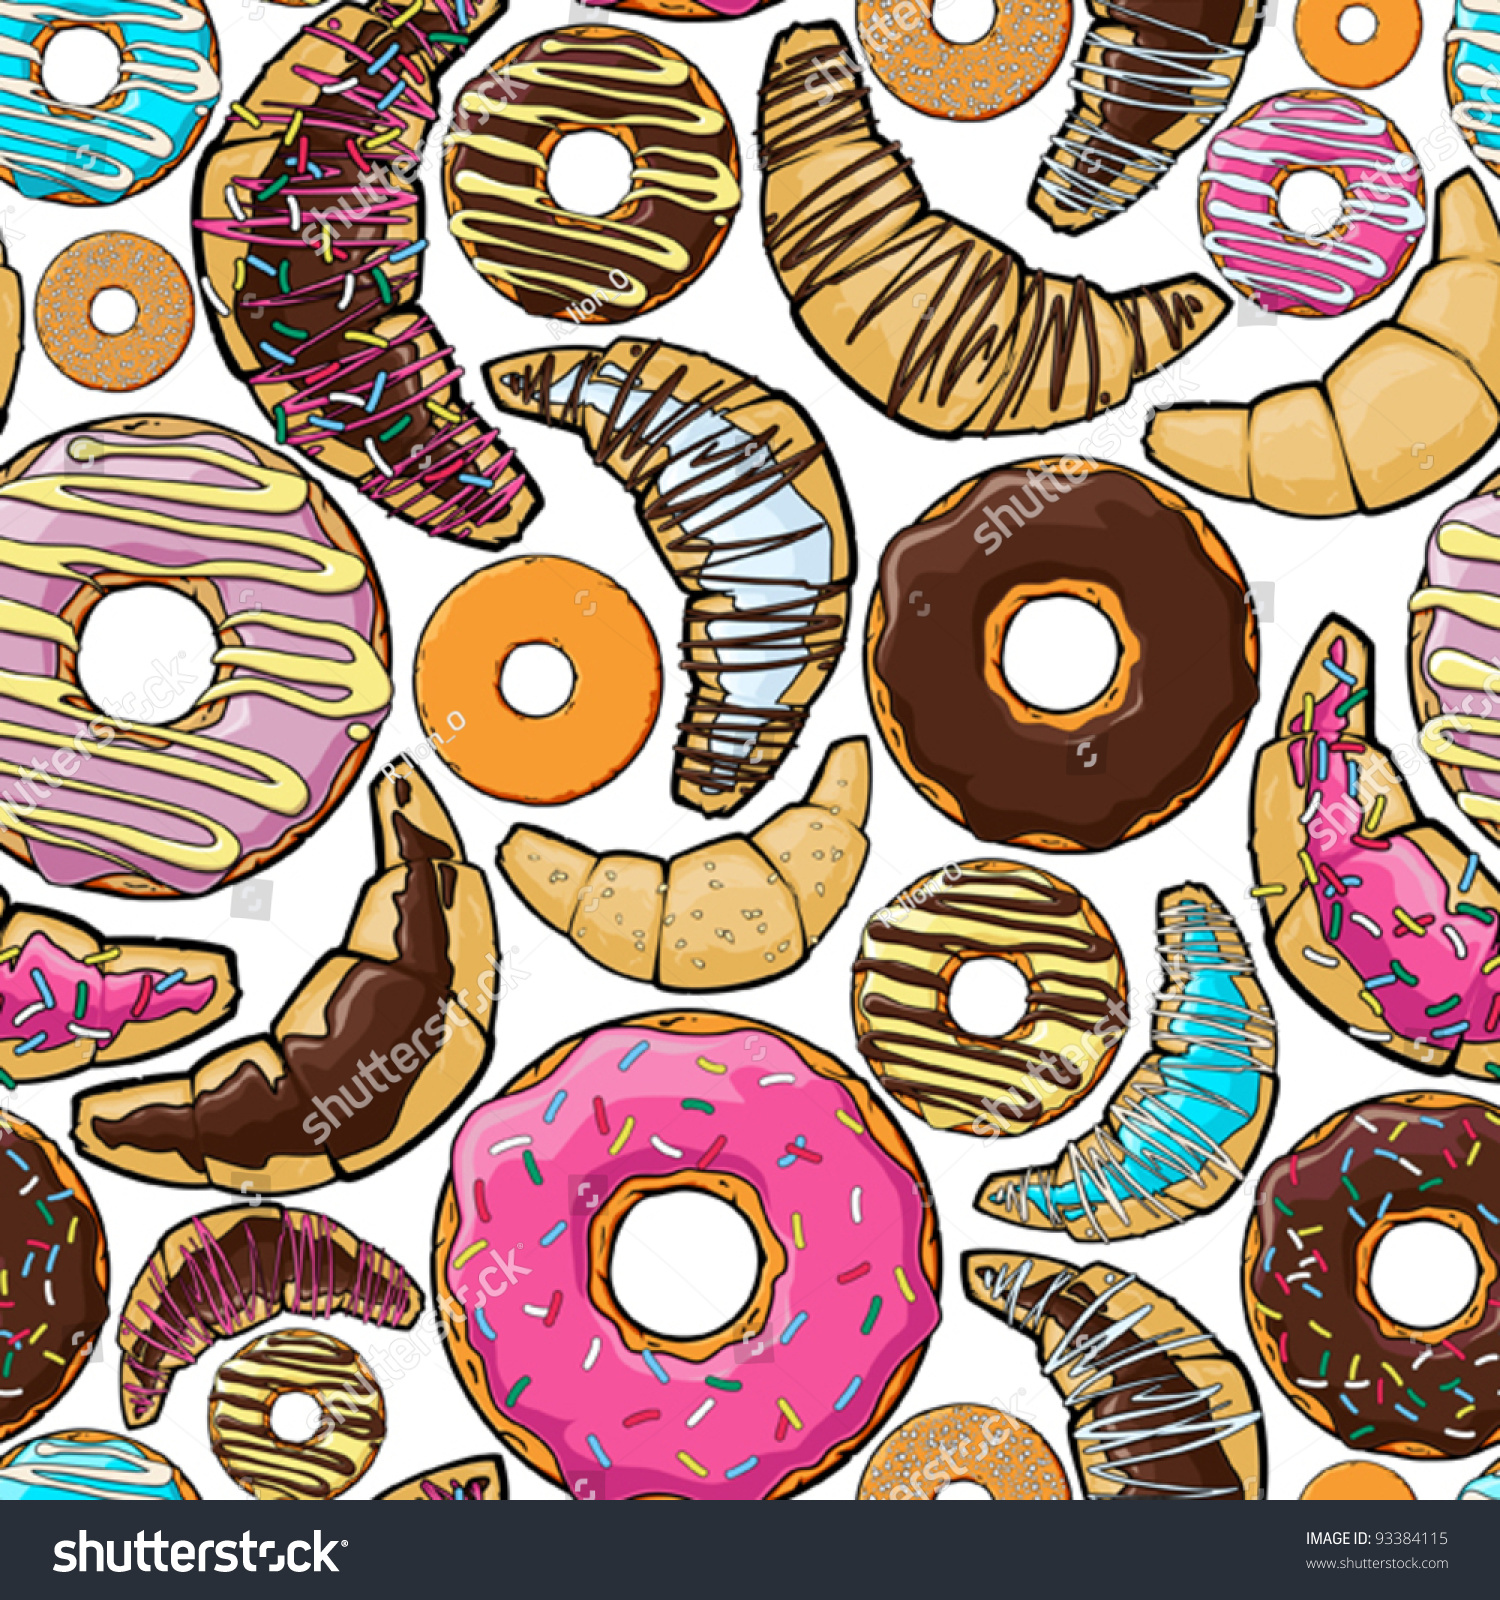 Vector Seamless Pattern With Cartoon Donuts And Croissants. - 93384115 ...